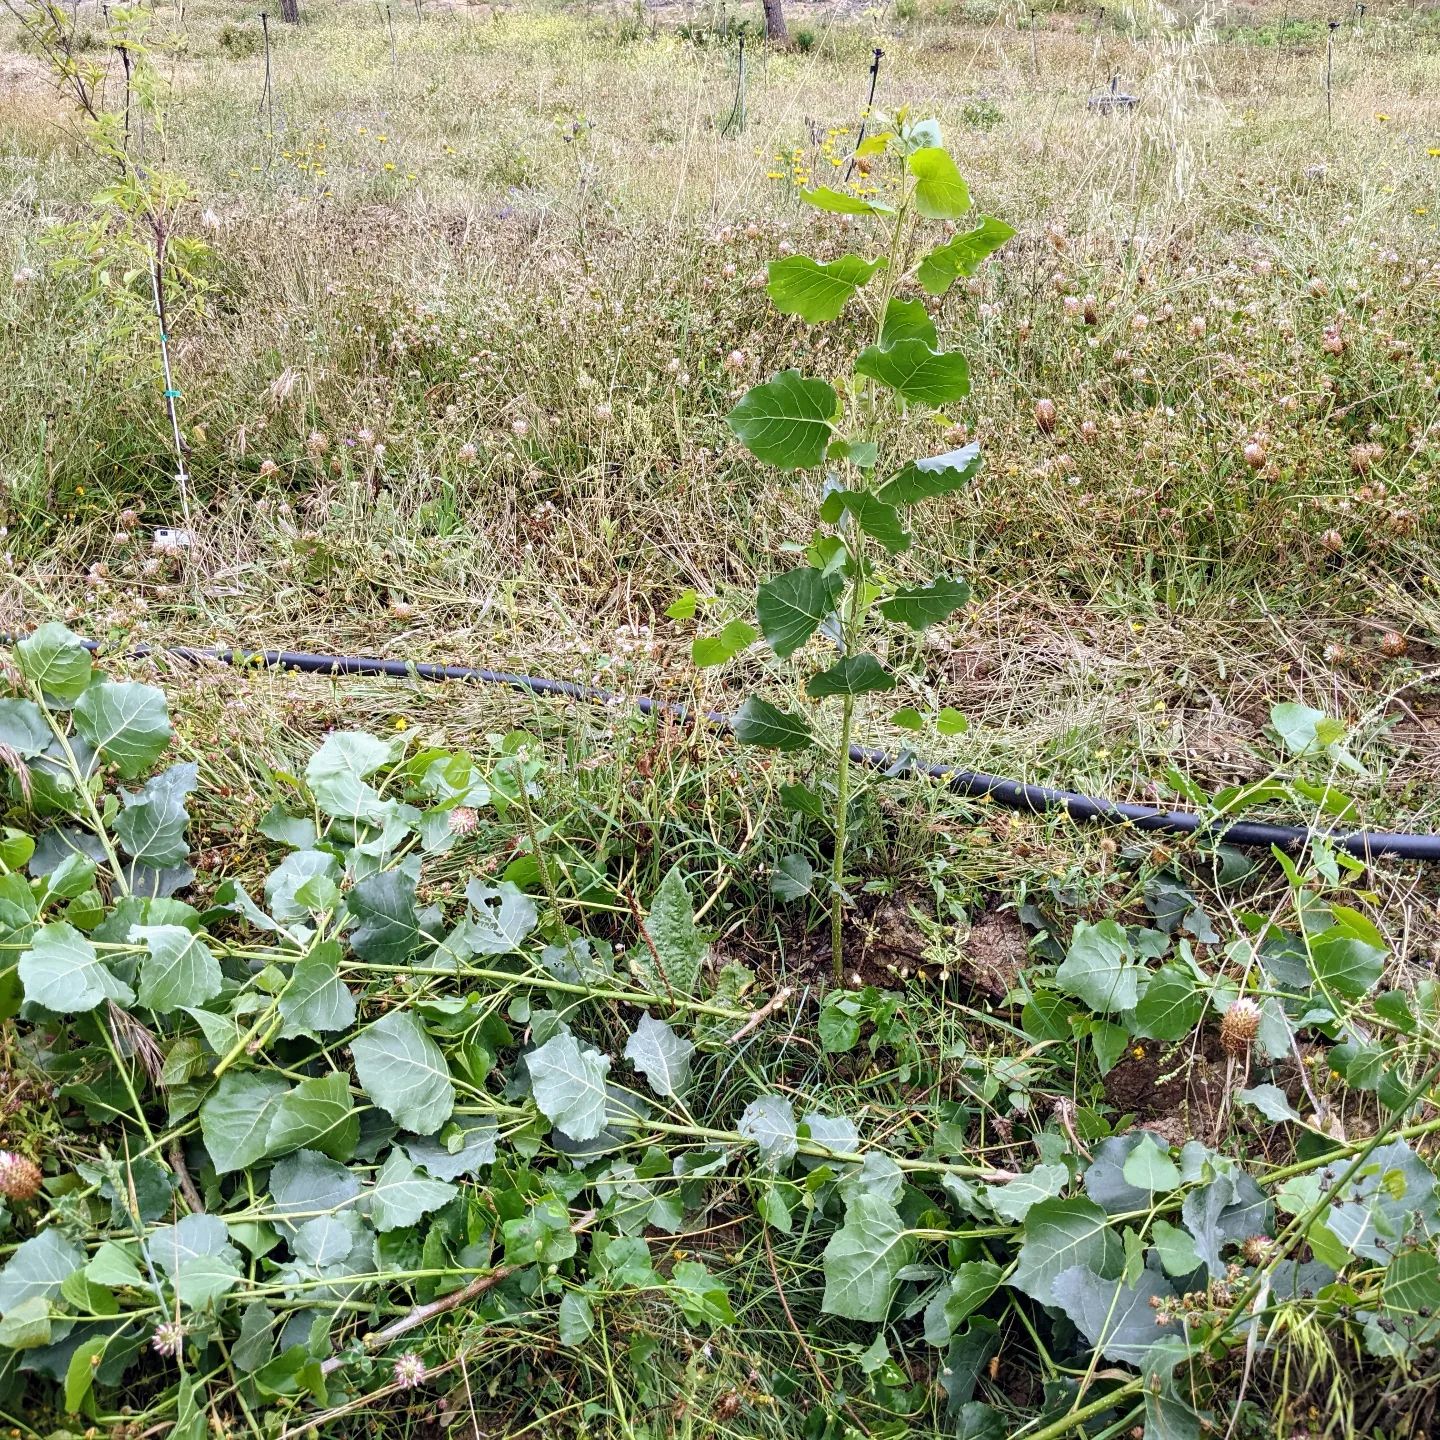 Wild #poplar bush, likely growing from the roots of those outside of the fence